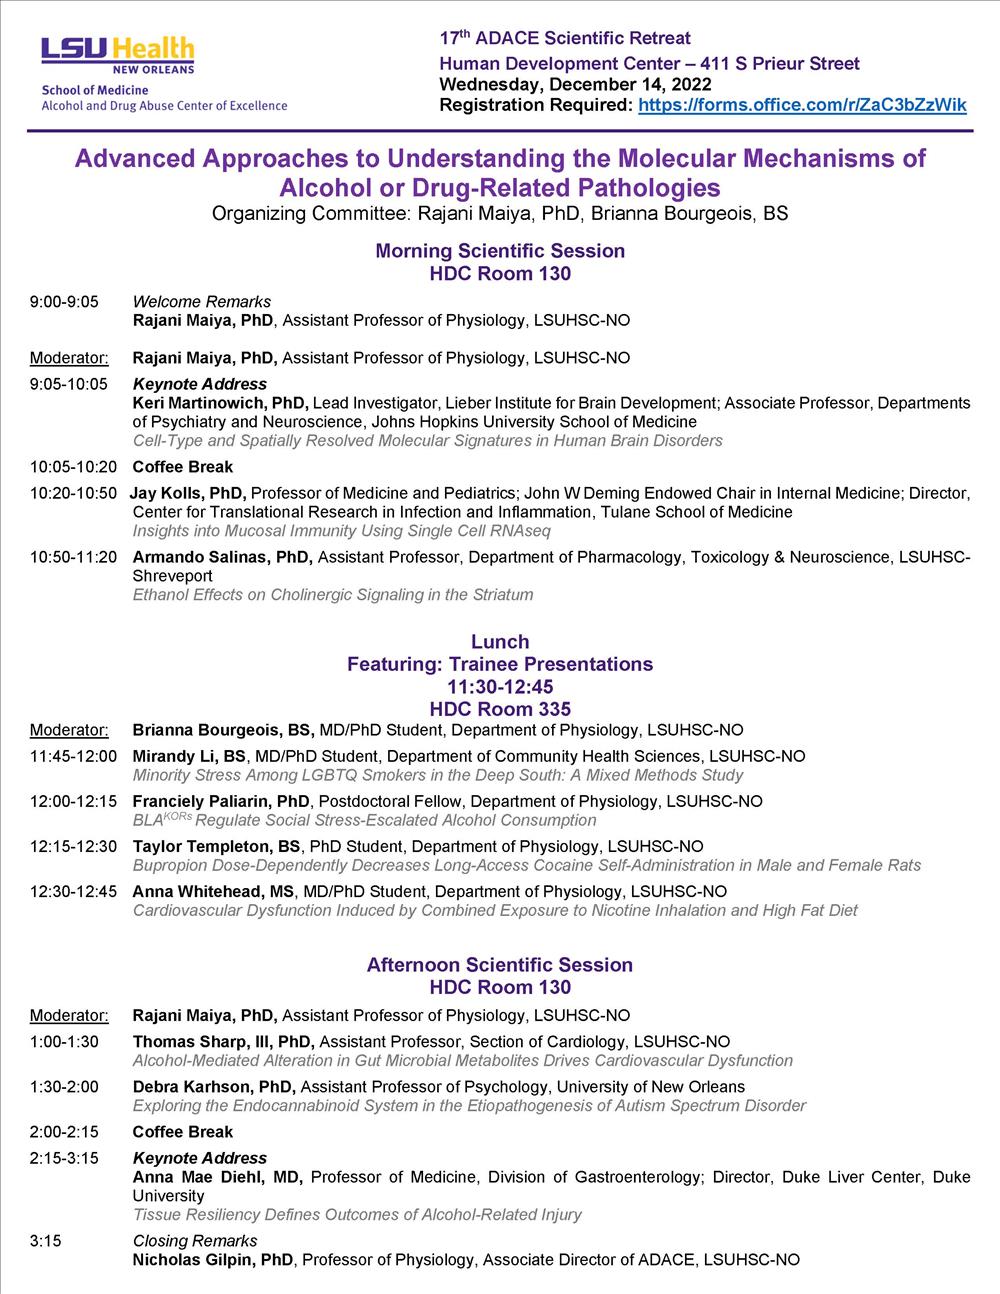 Advanced Approaches to Understanding the Molecular Mechanisms of Alcohol or Drug-Related Pathologies